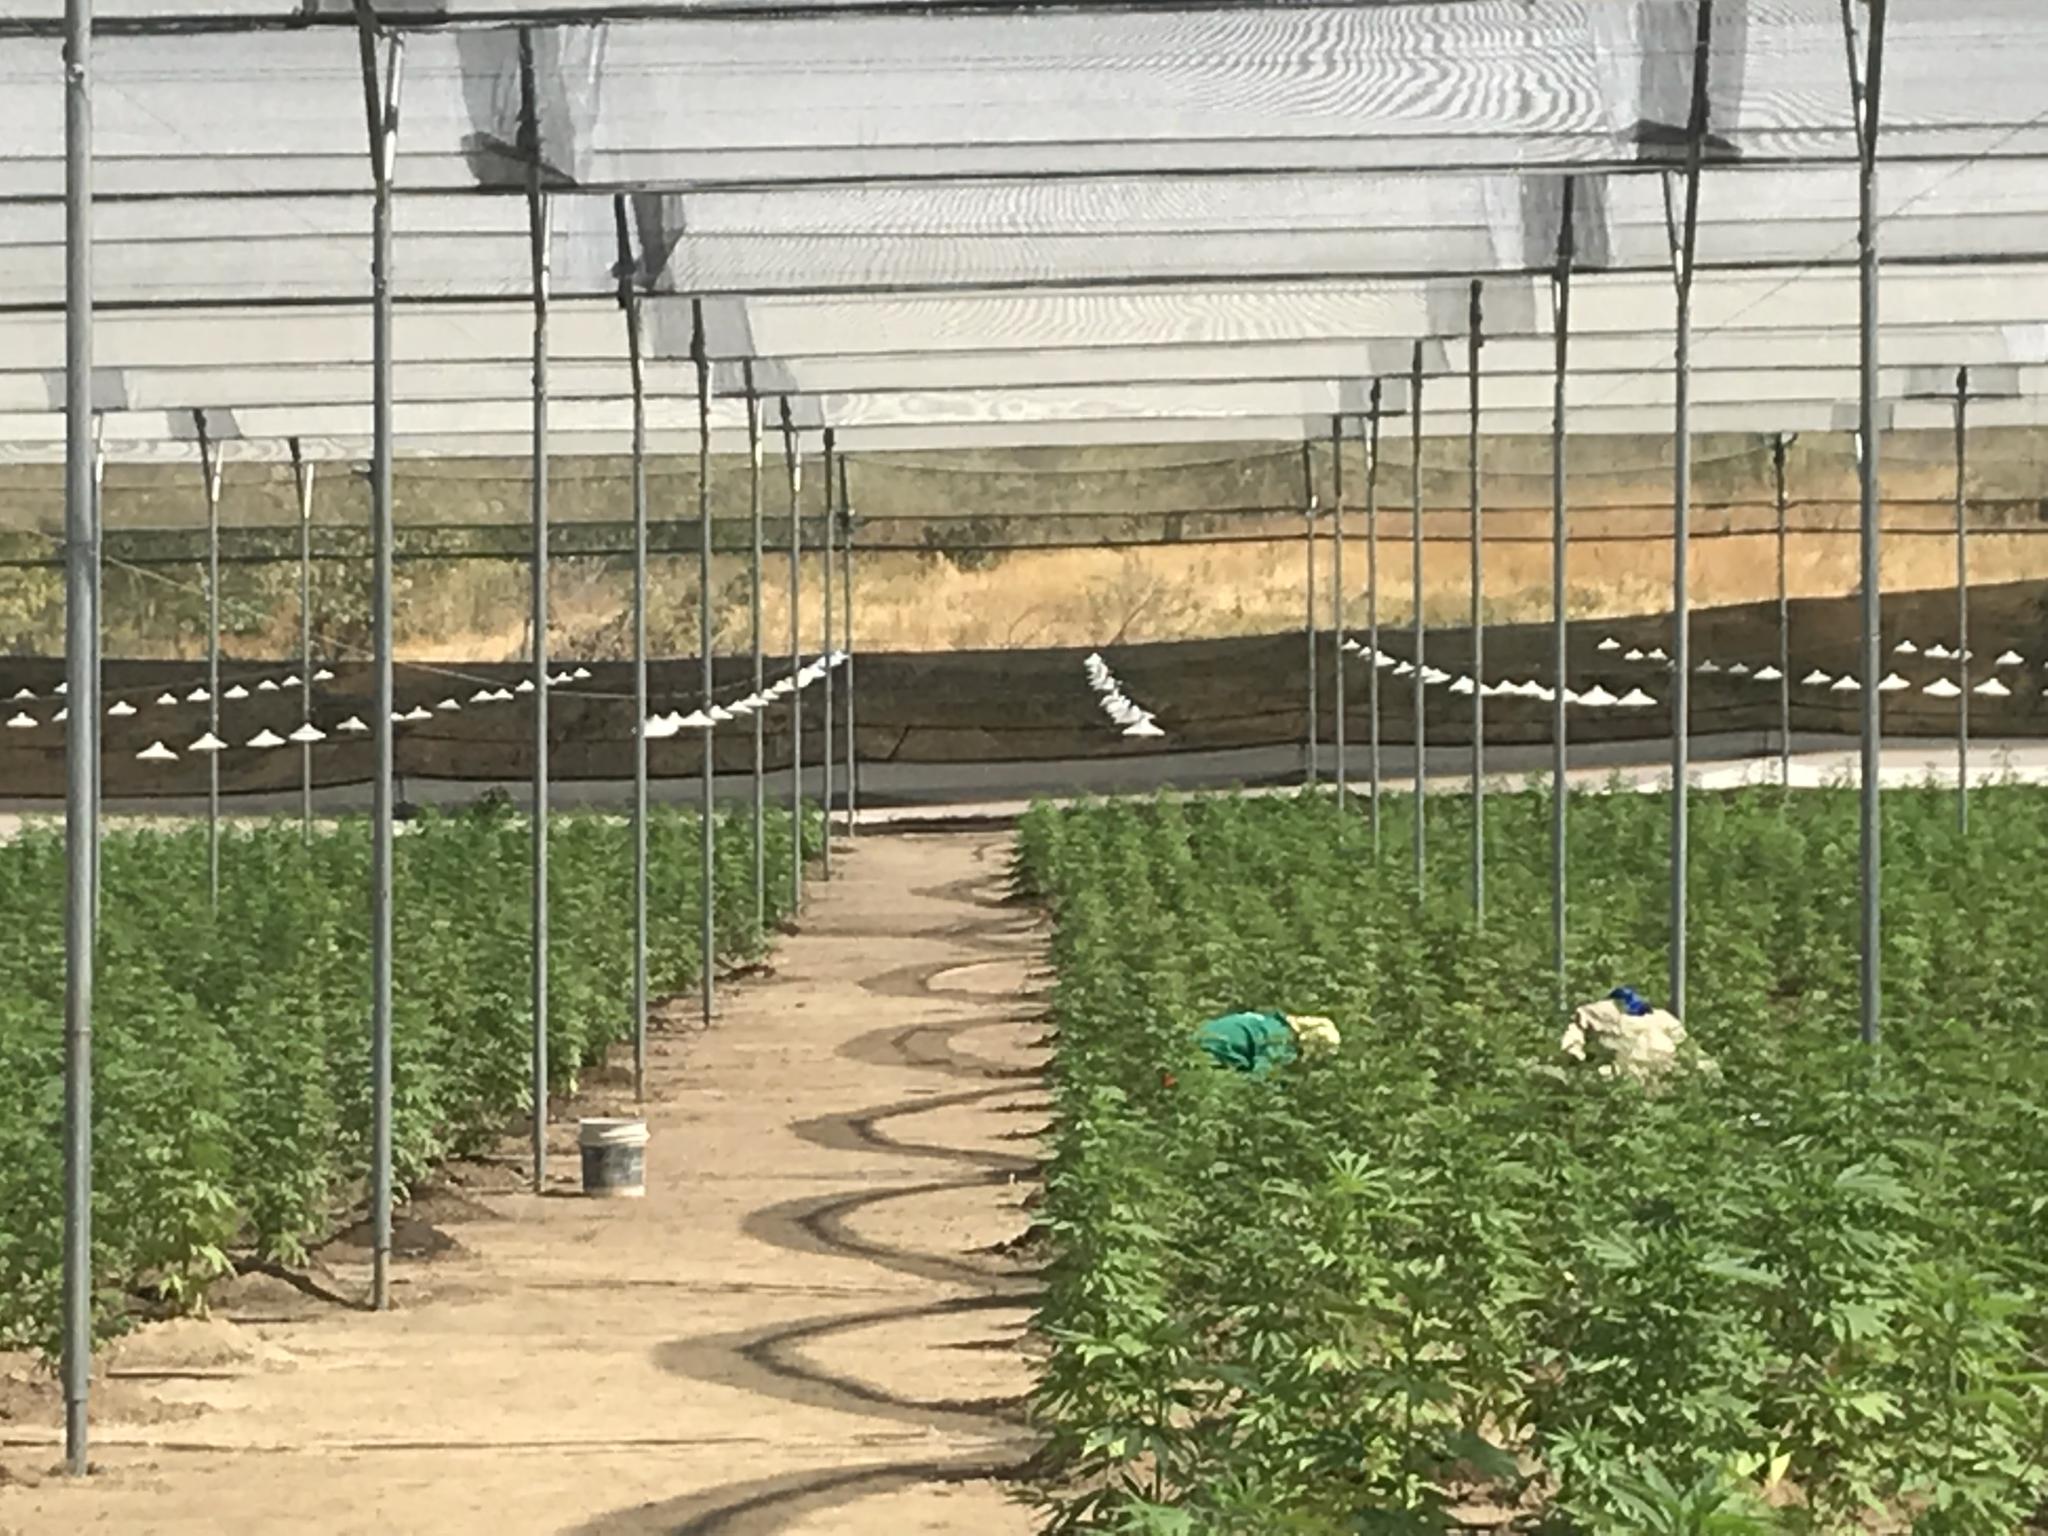  helix-tcs-launches-hemp-tracking-system-in-delaware 